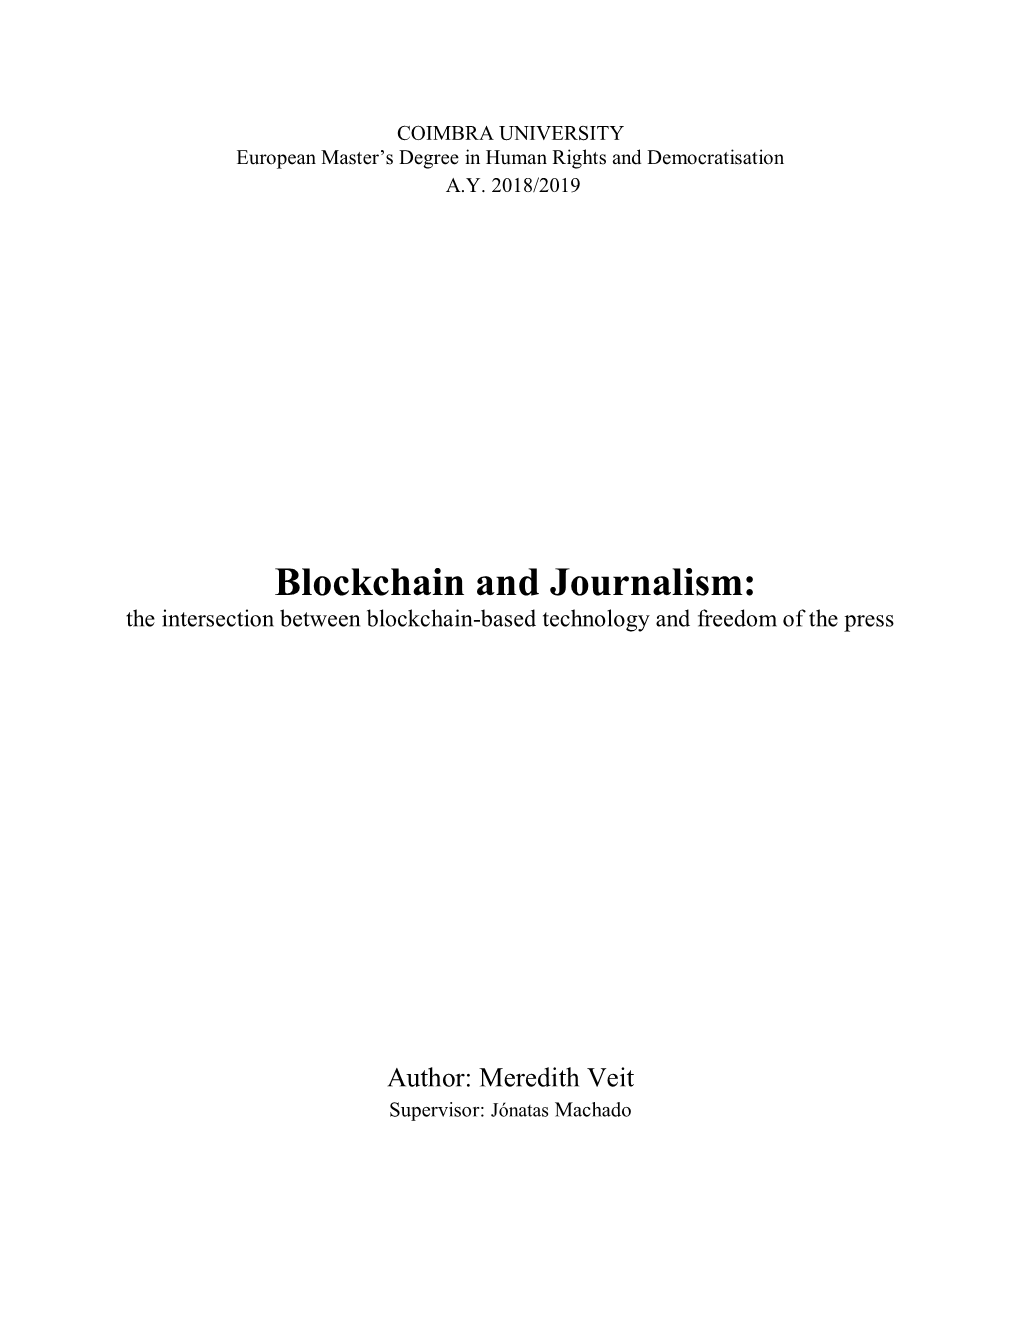 Blockchain and Journalism: the Intersection Between Blockchain-Based Technology and Freedom of the Press